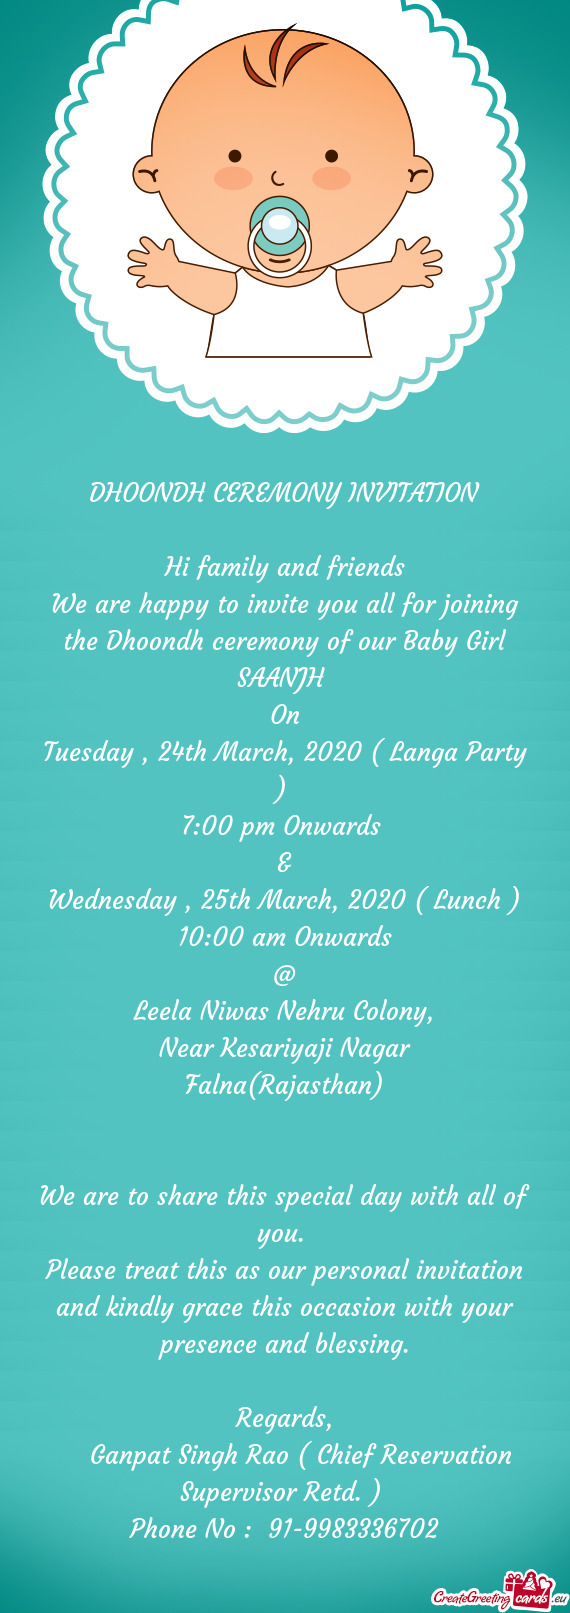 We are happy to invite you all for joining the Dhoondh ceremony of our Baby Girl SAANJH